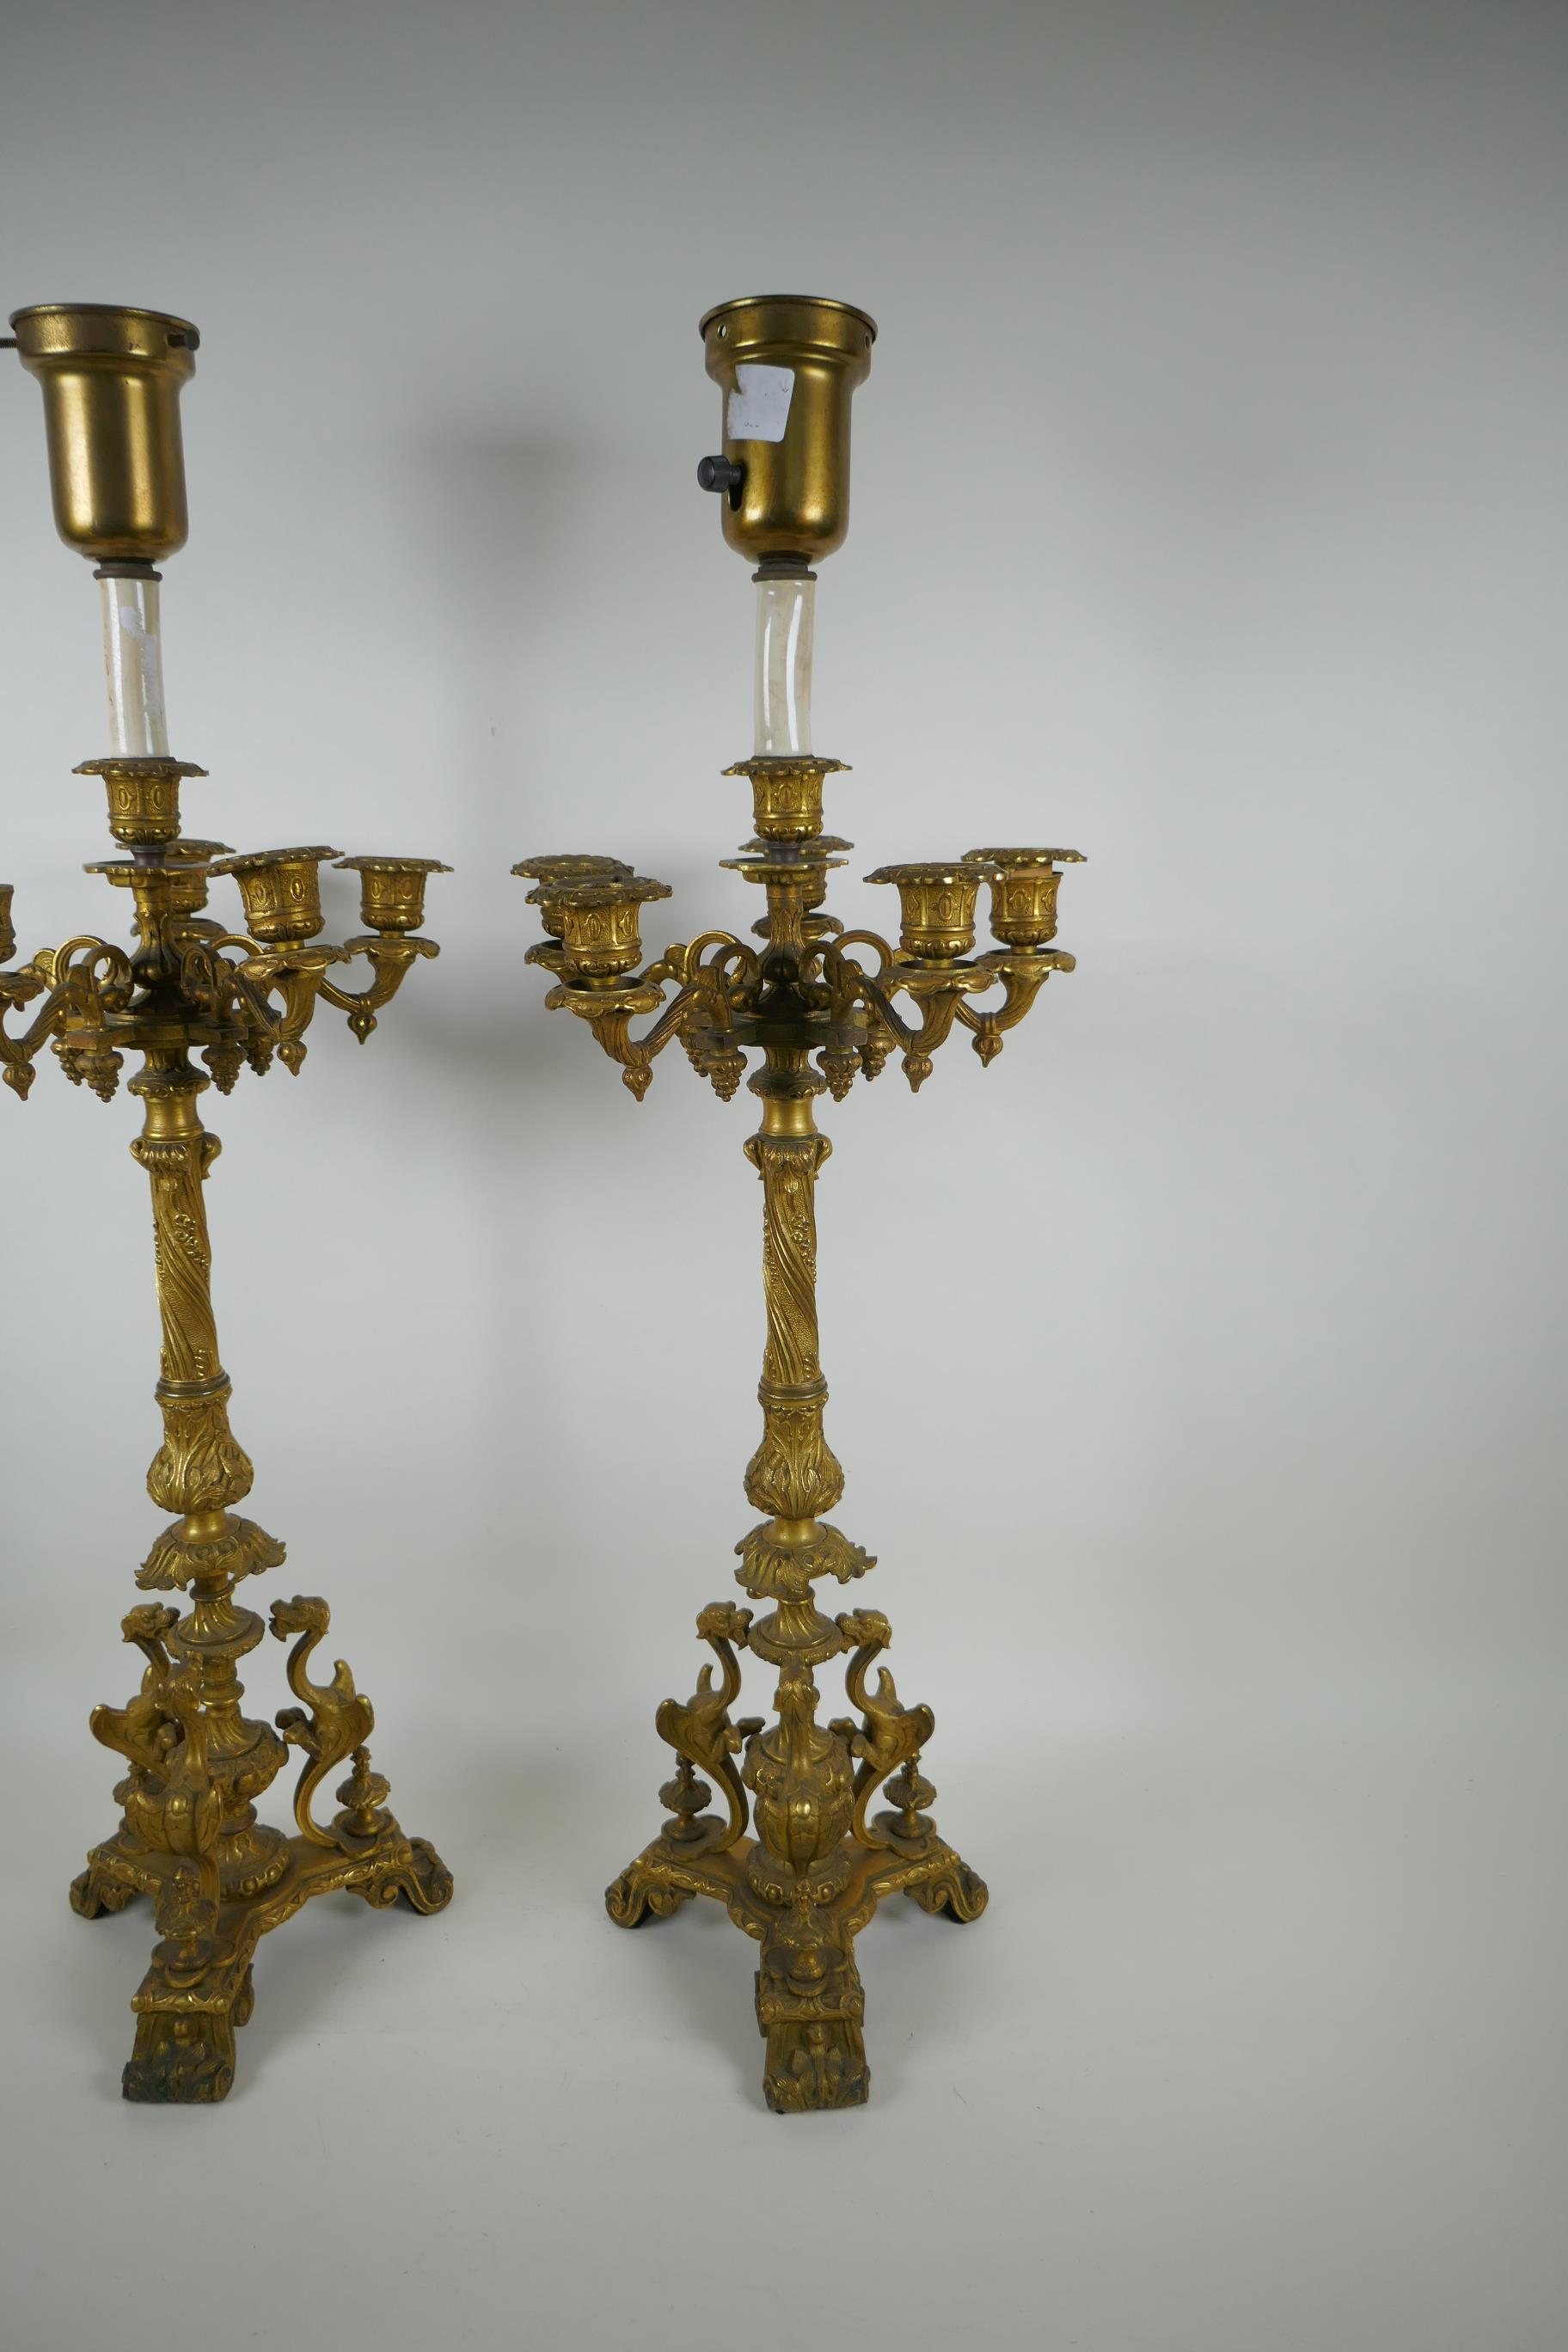 A pair of French ormolu five branch candlesticks on a tripod base with griffin decoration, the - Image 3 of 5